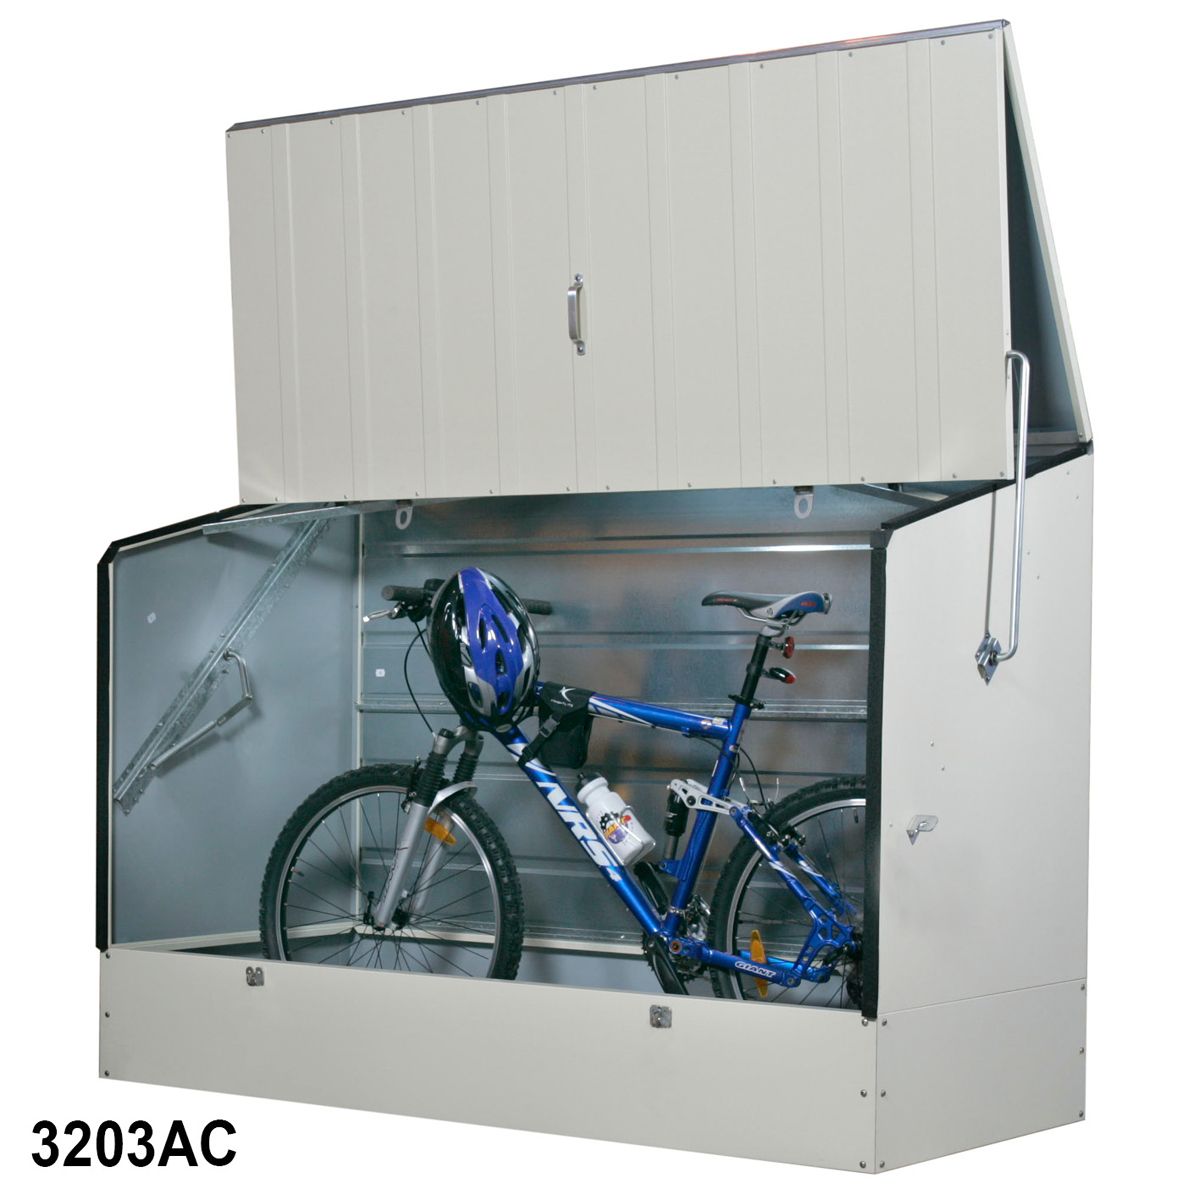 Storage Shed: Storage shed for Bicycle